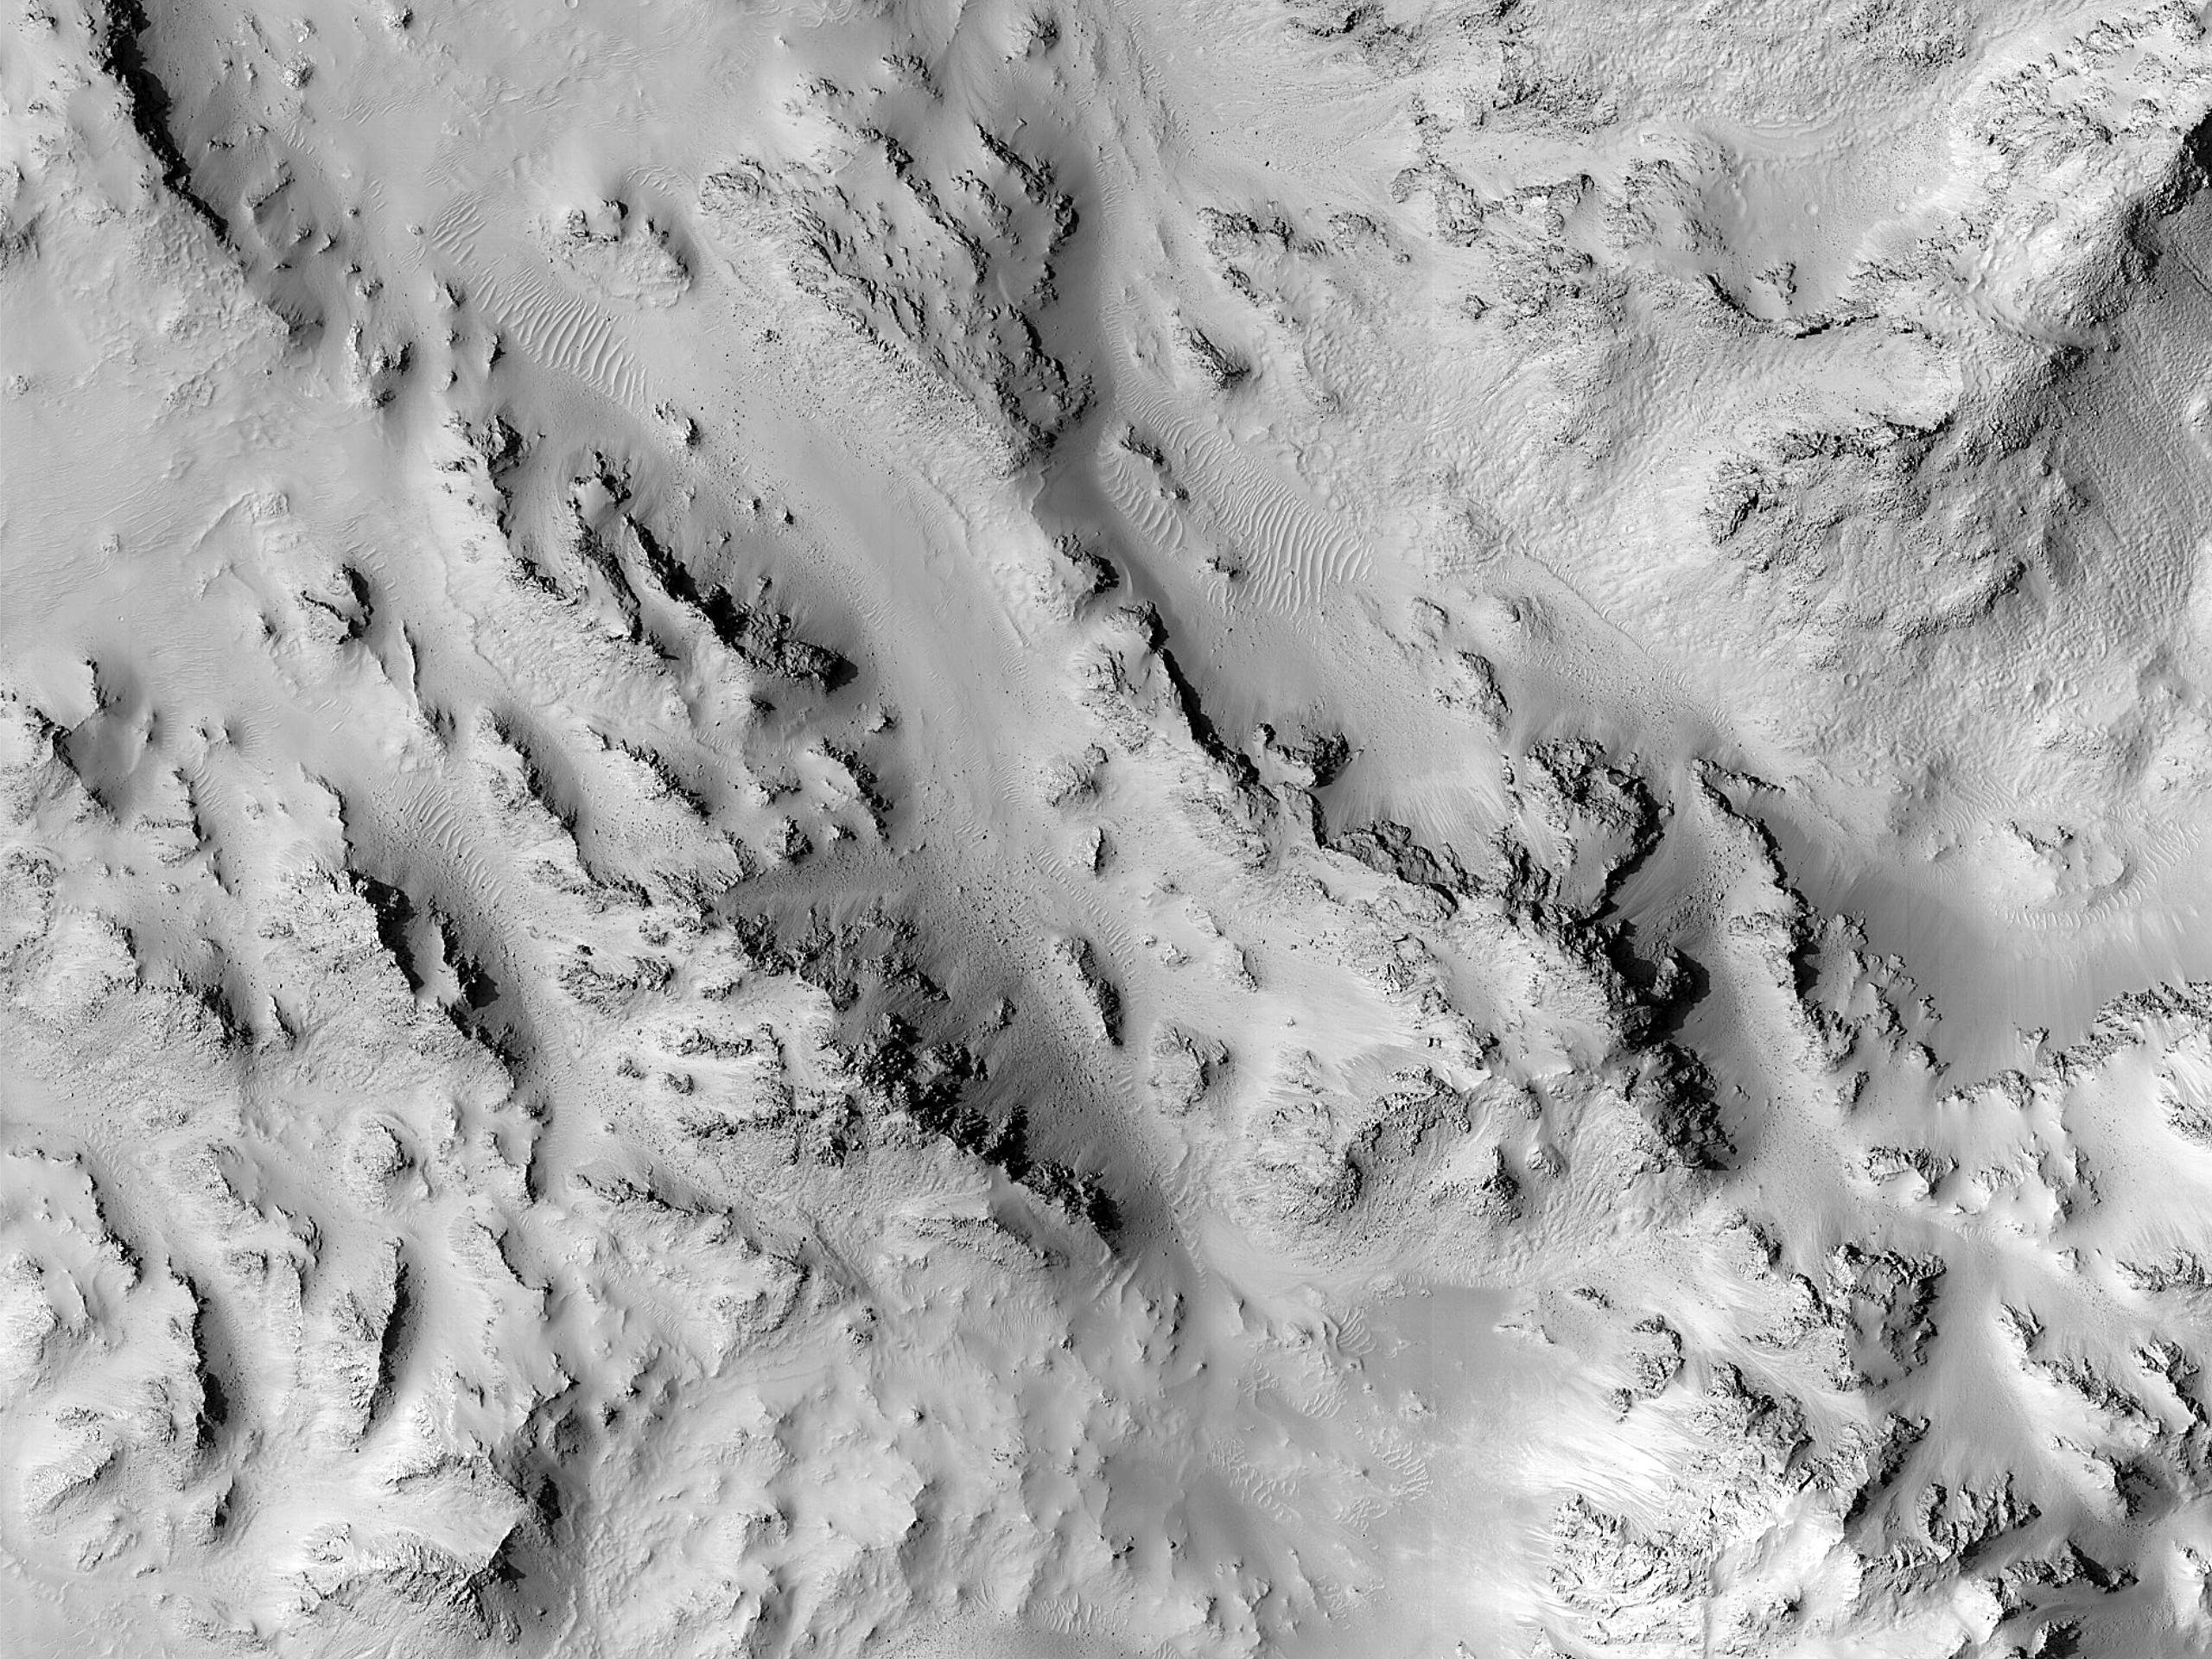 Among Hale Crater’s Central Peaks